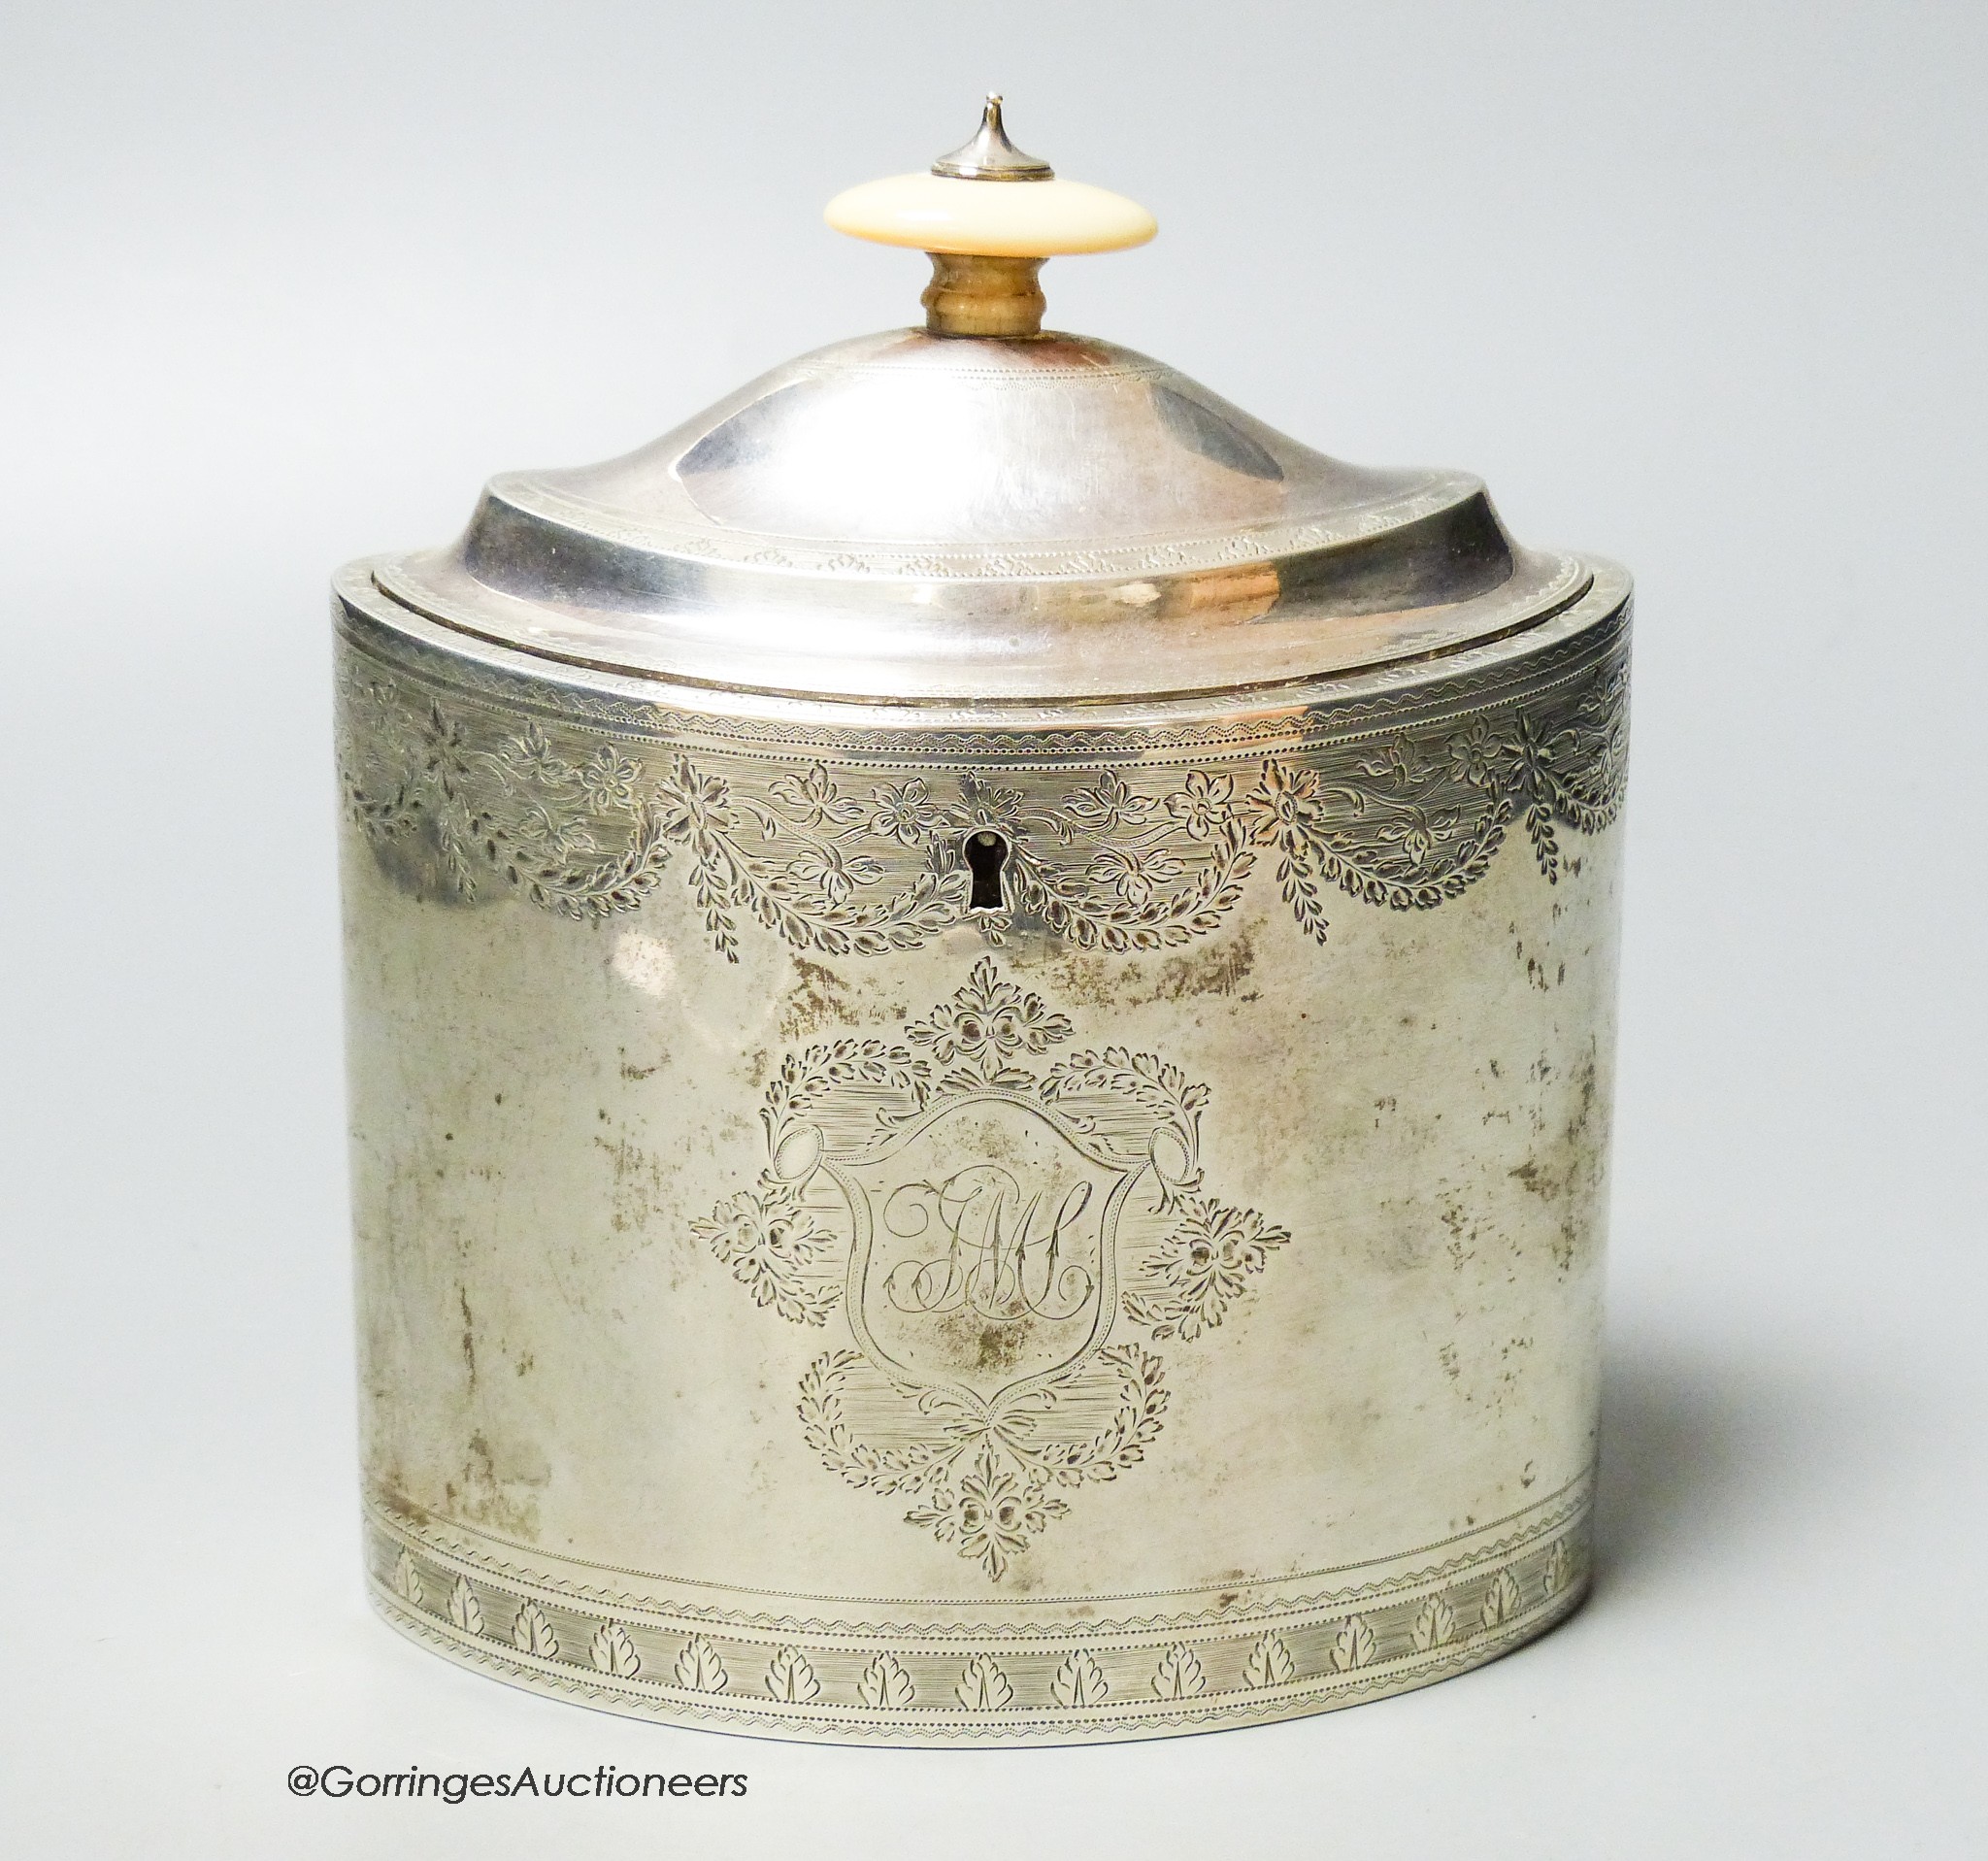 A George III engraved oval tea caddy, with ivory knop, no key, Henry Nutting, London, 1796, length 13.4cm, gross weight 12.5oz.                                                                                             